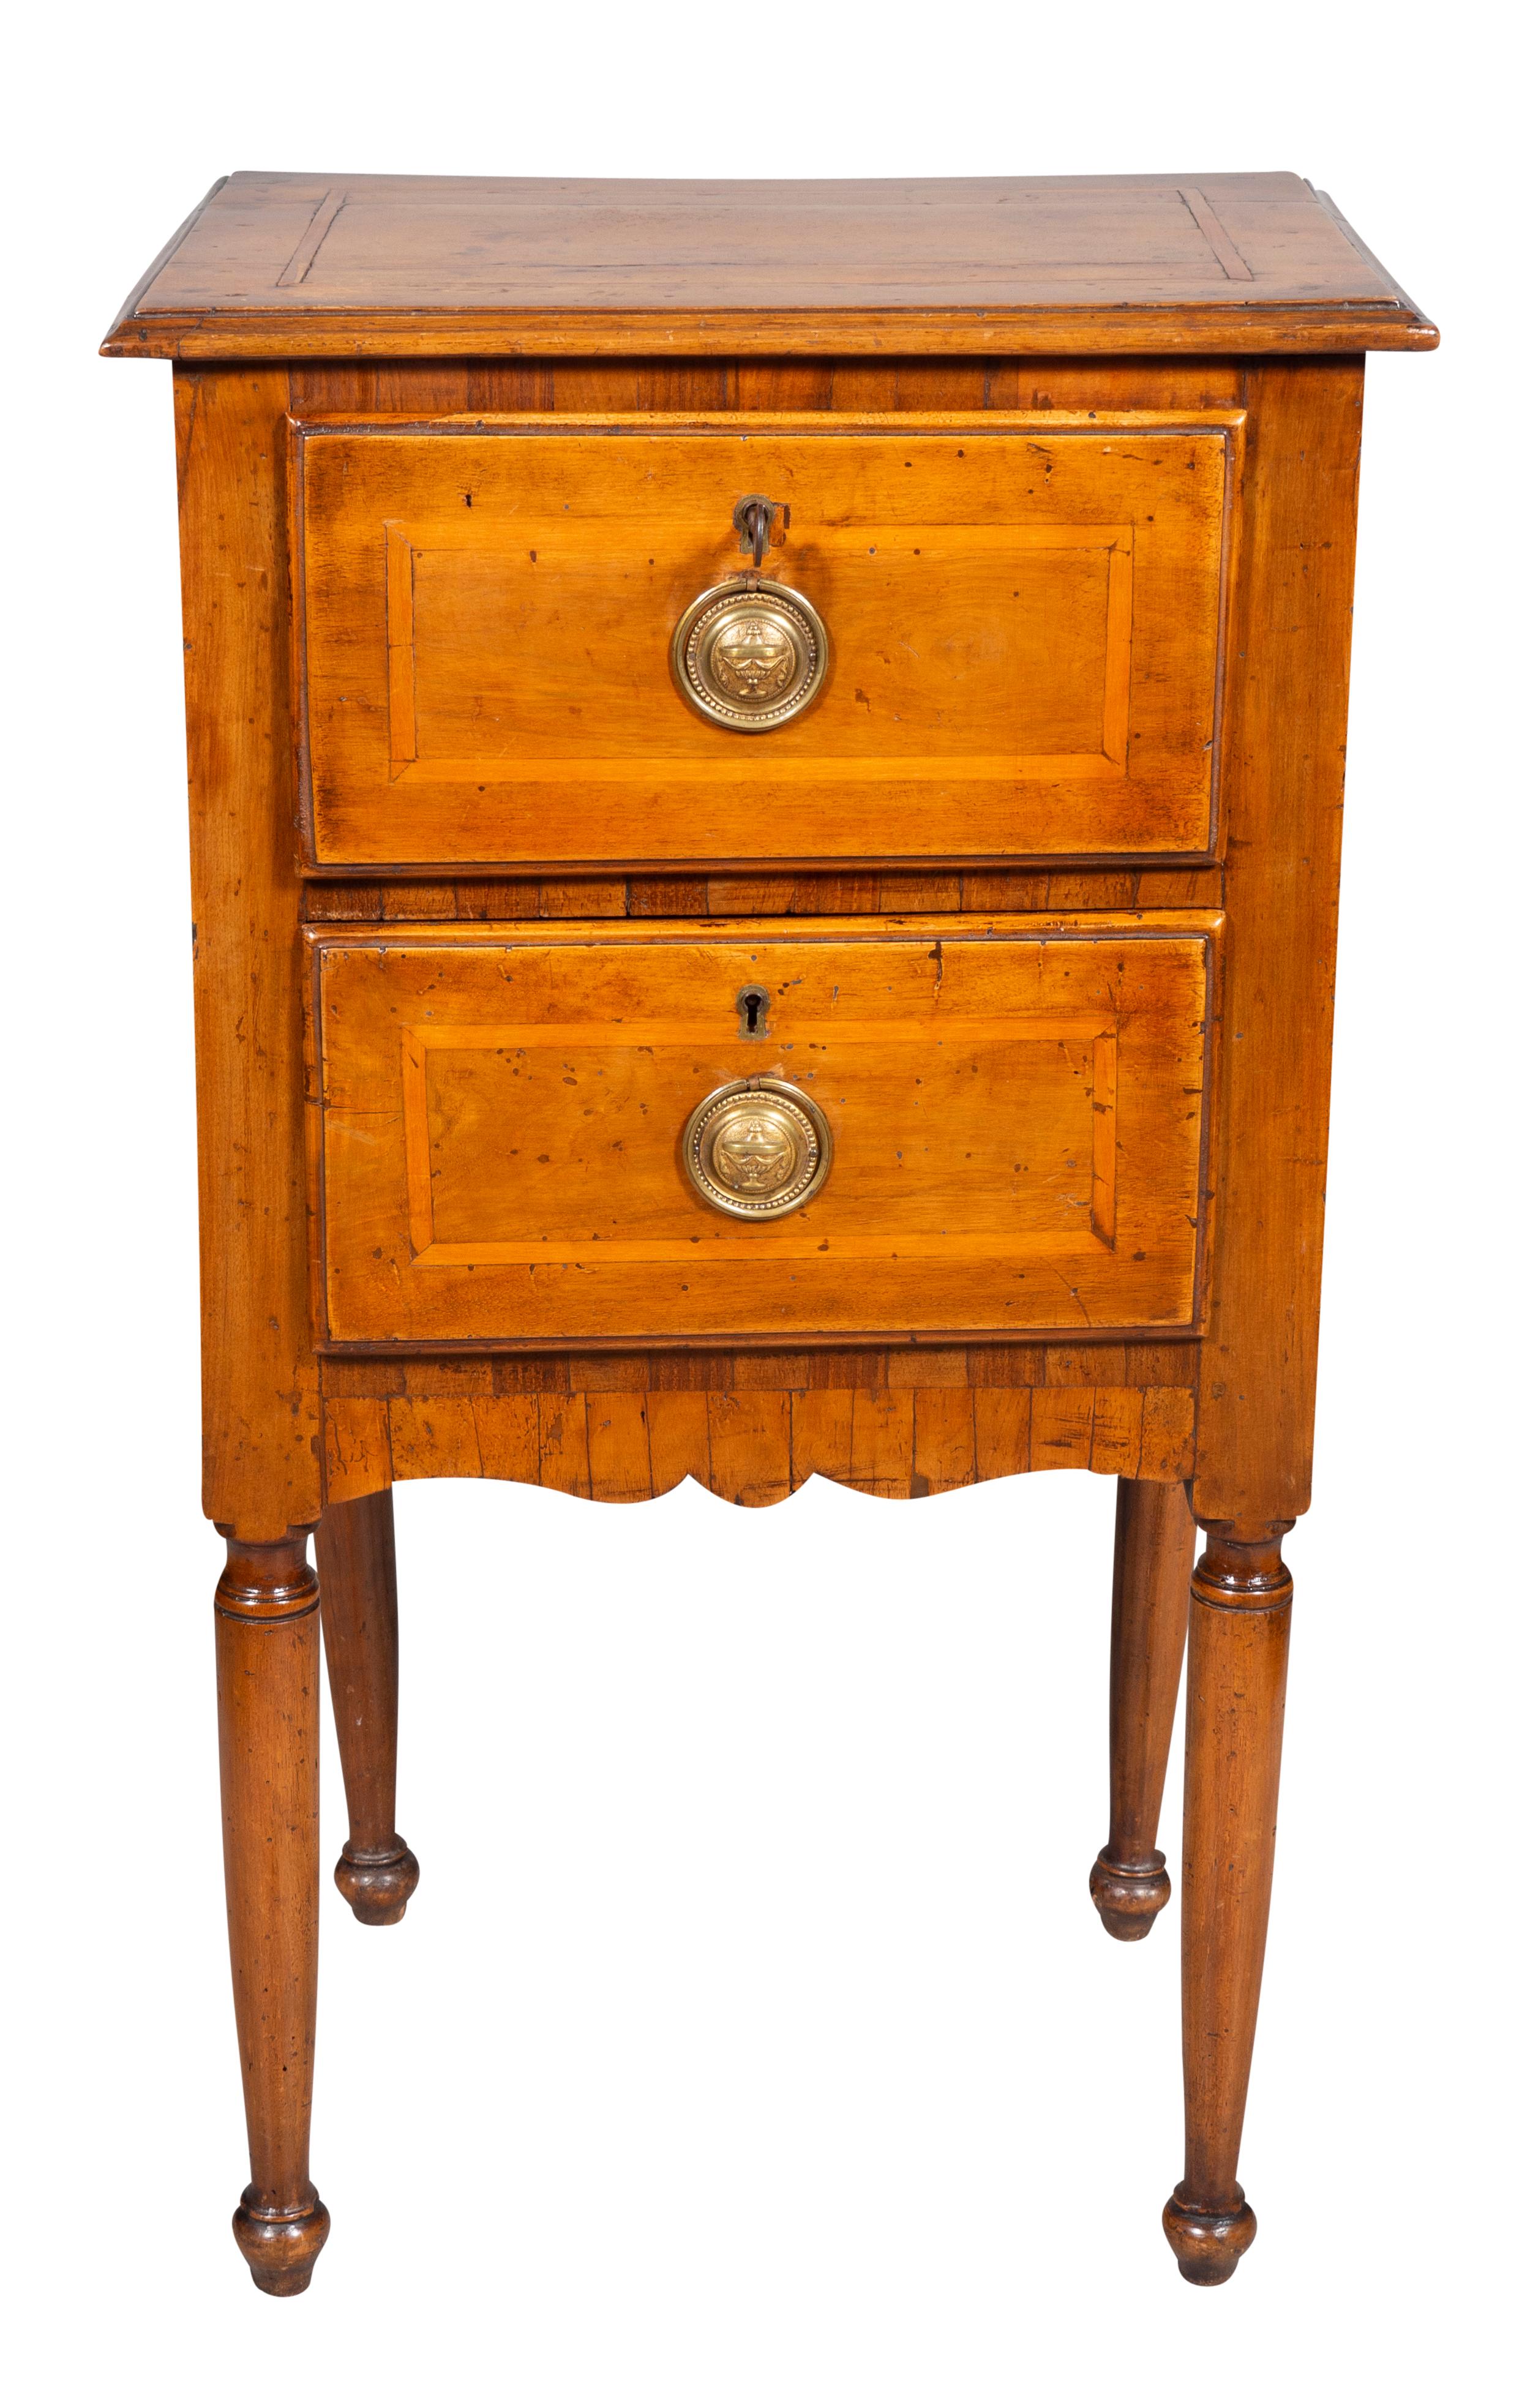 Rectangular top over two drawers with inlaid border and brass handles raised on circular tapered legs.